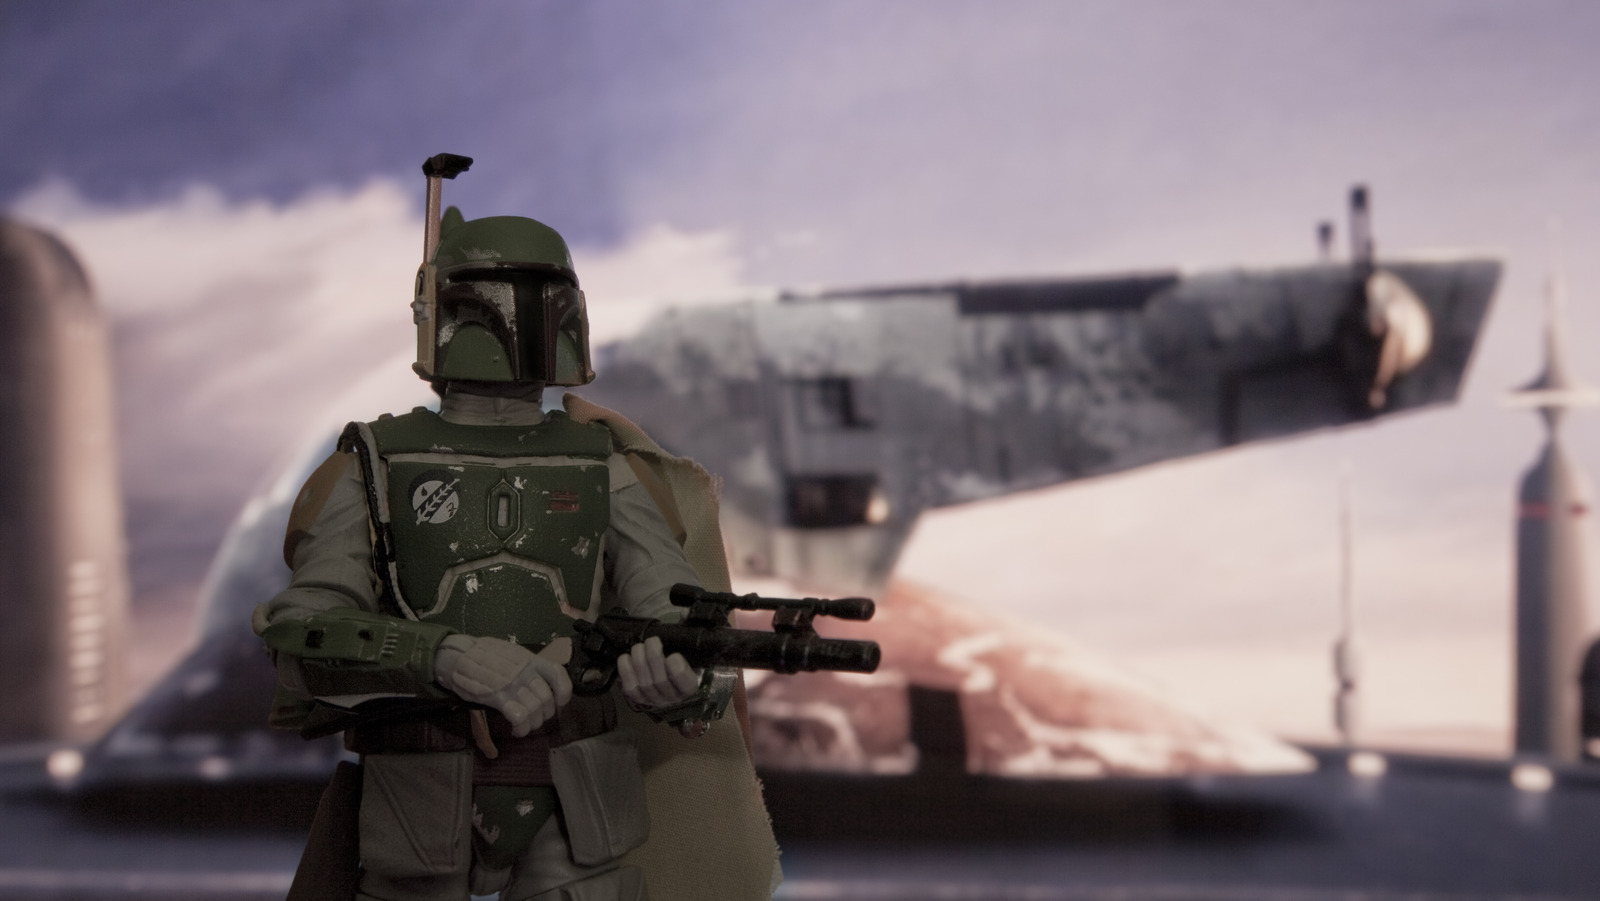 Boba Fett's Ship Name Changed From Slave-1 Officially